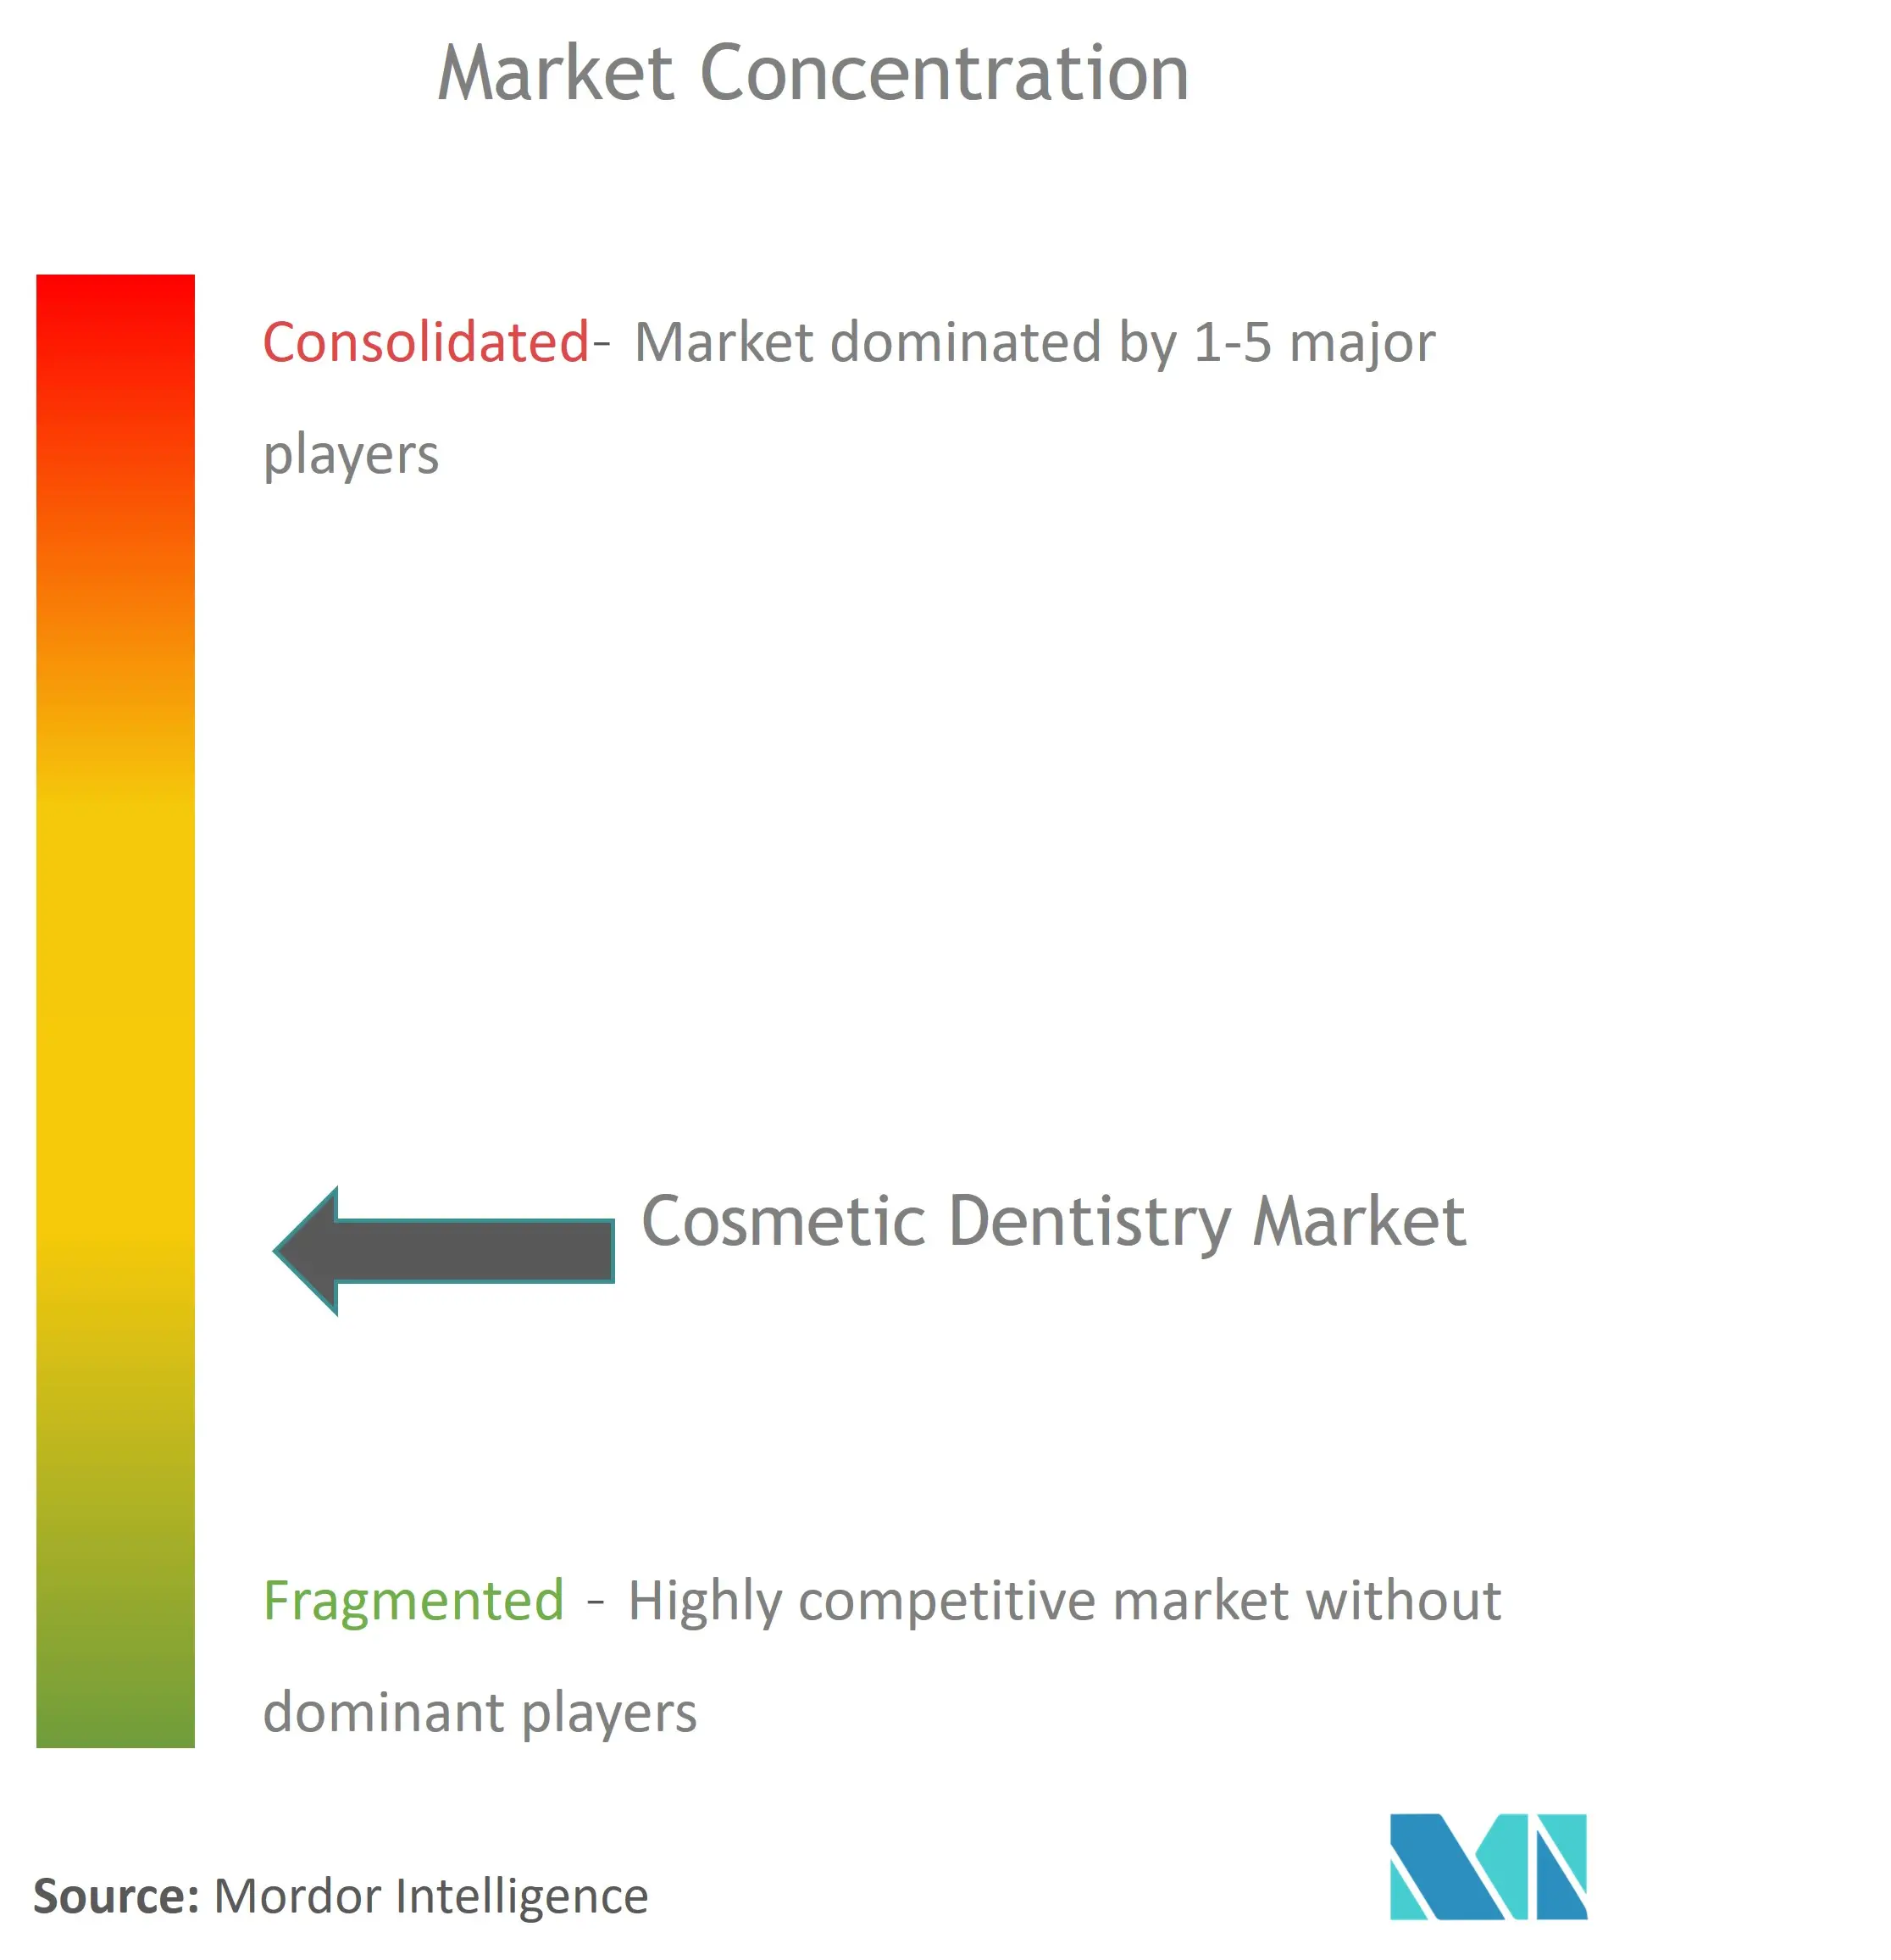 Cosmetic Dentistry Market Concentration